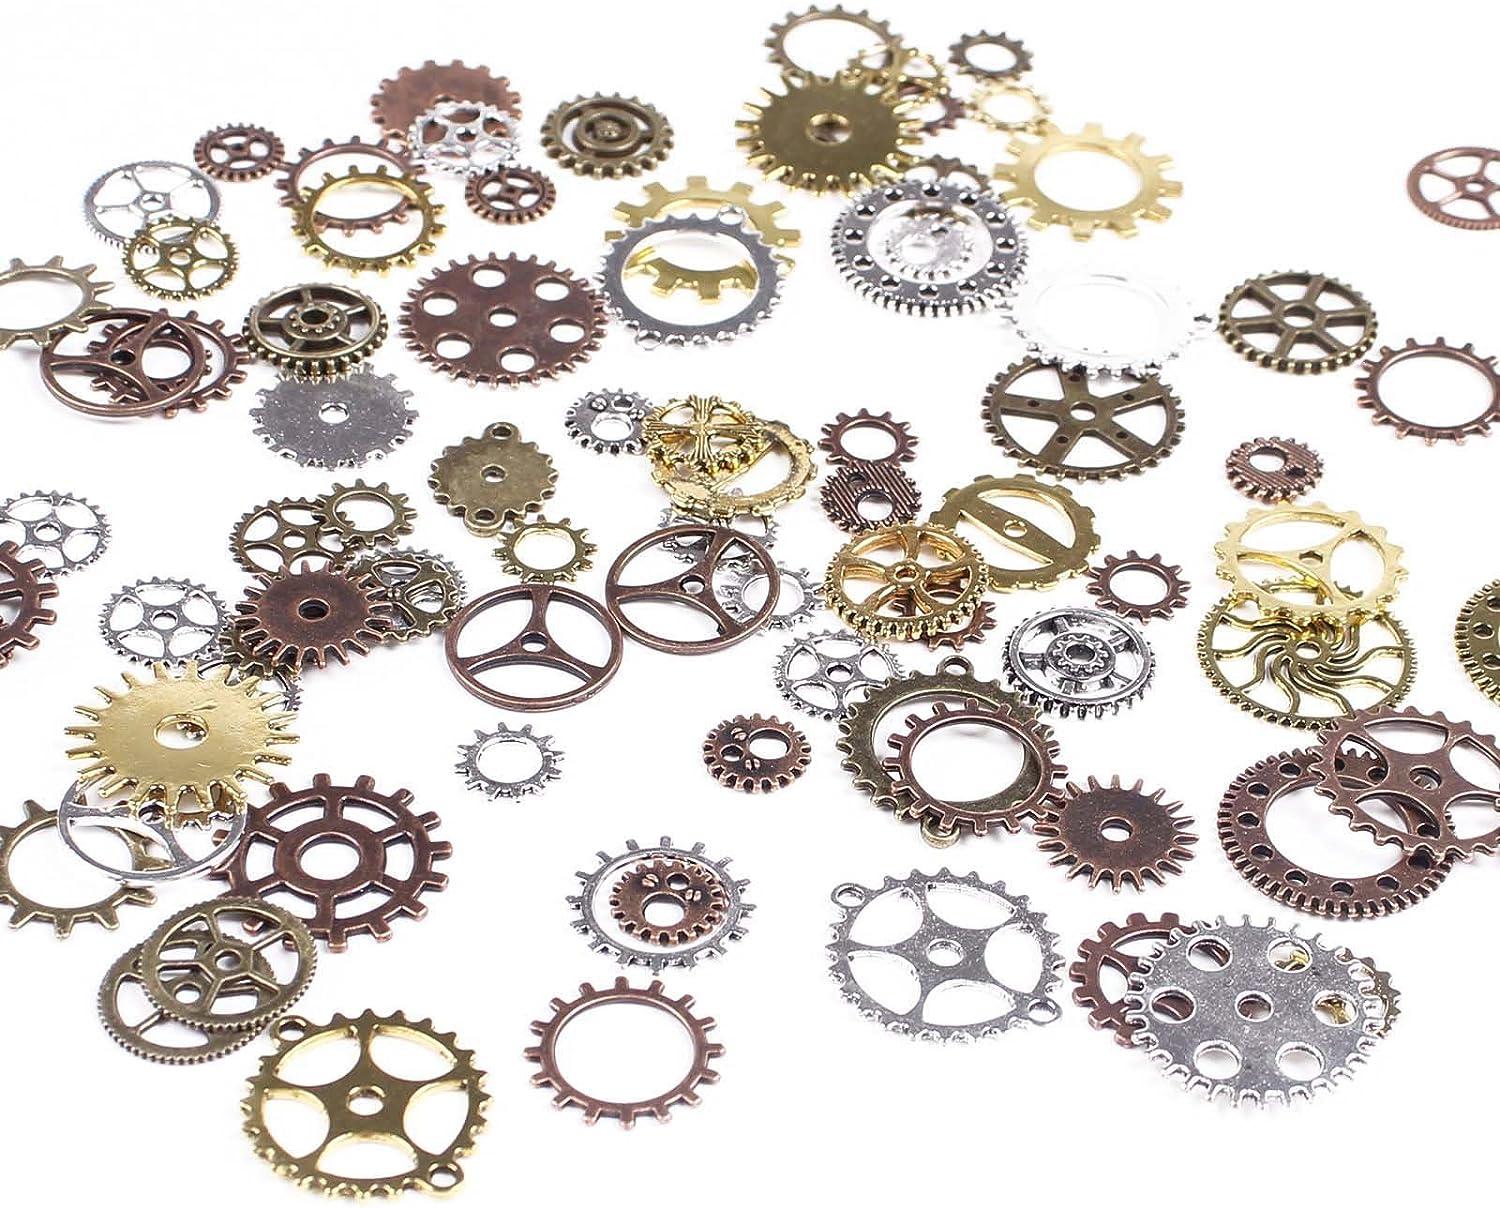  BIHRTC 140 Gram (Approx 92pcs) DIY Assorted Color Antique Metal  Steampunk Watch Gear Cog Wheel Skull Musical Note Skull Hand Safety Pin  Charms Pendant for Crafting, Jewelry Making Accessory : Arts